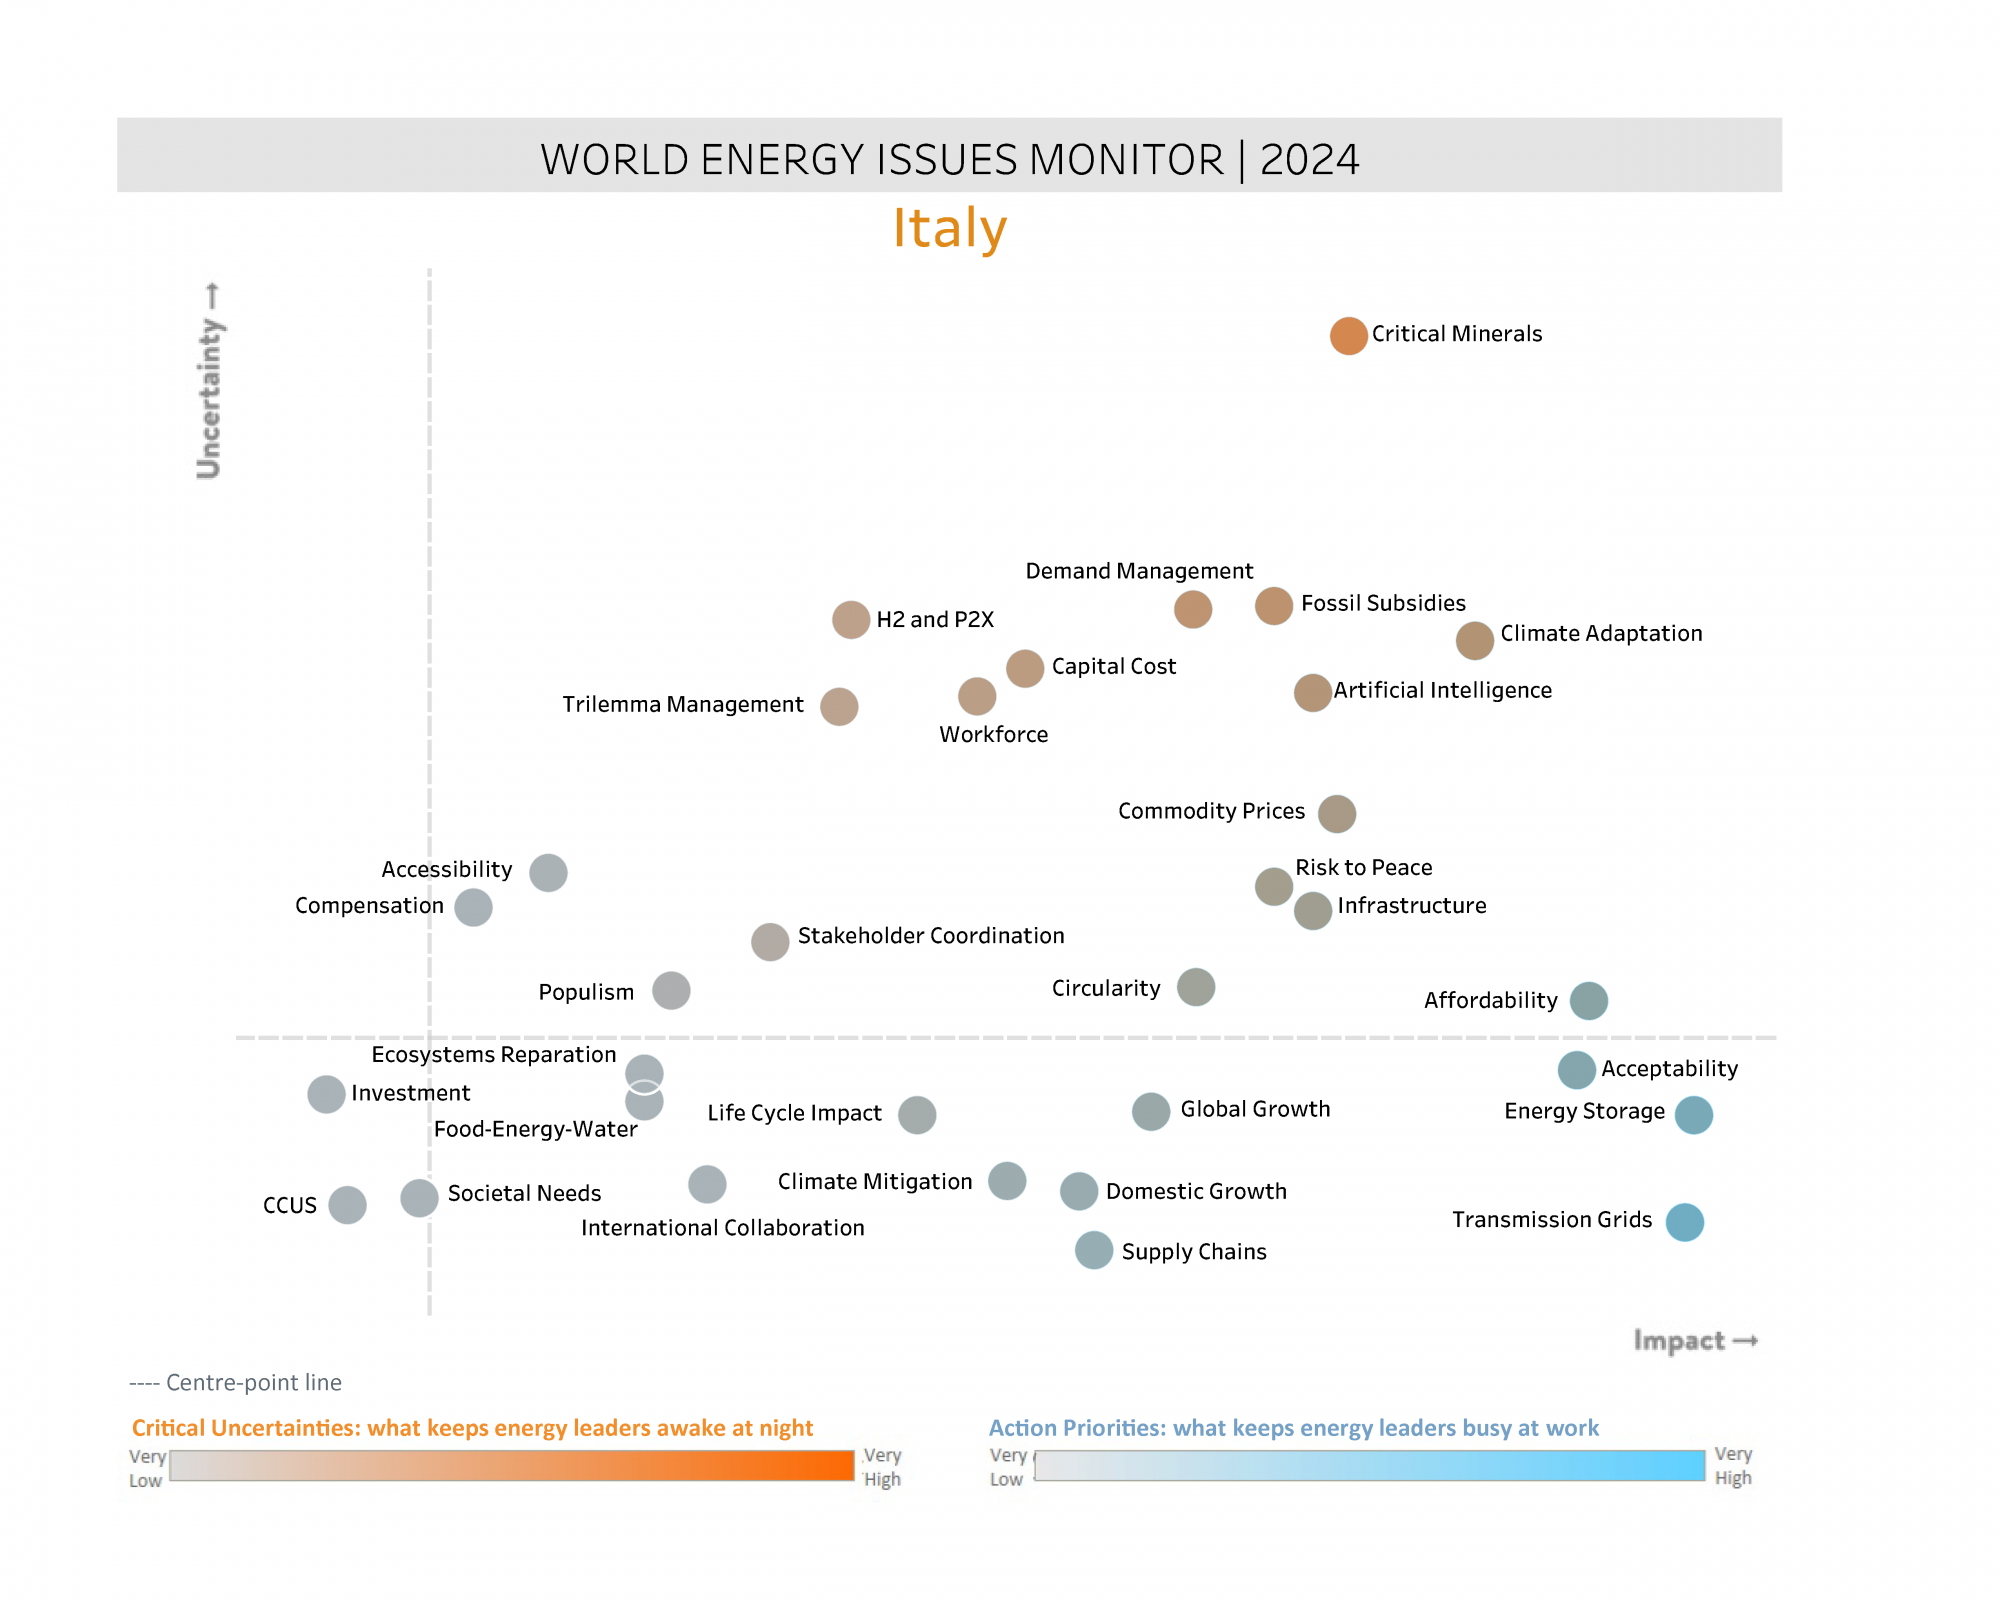 Energy issues in Italy